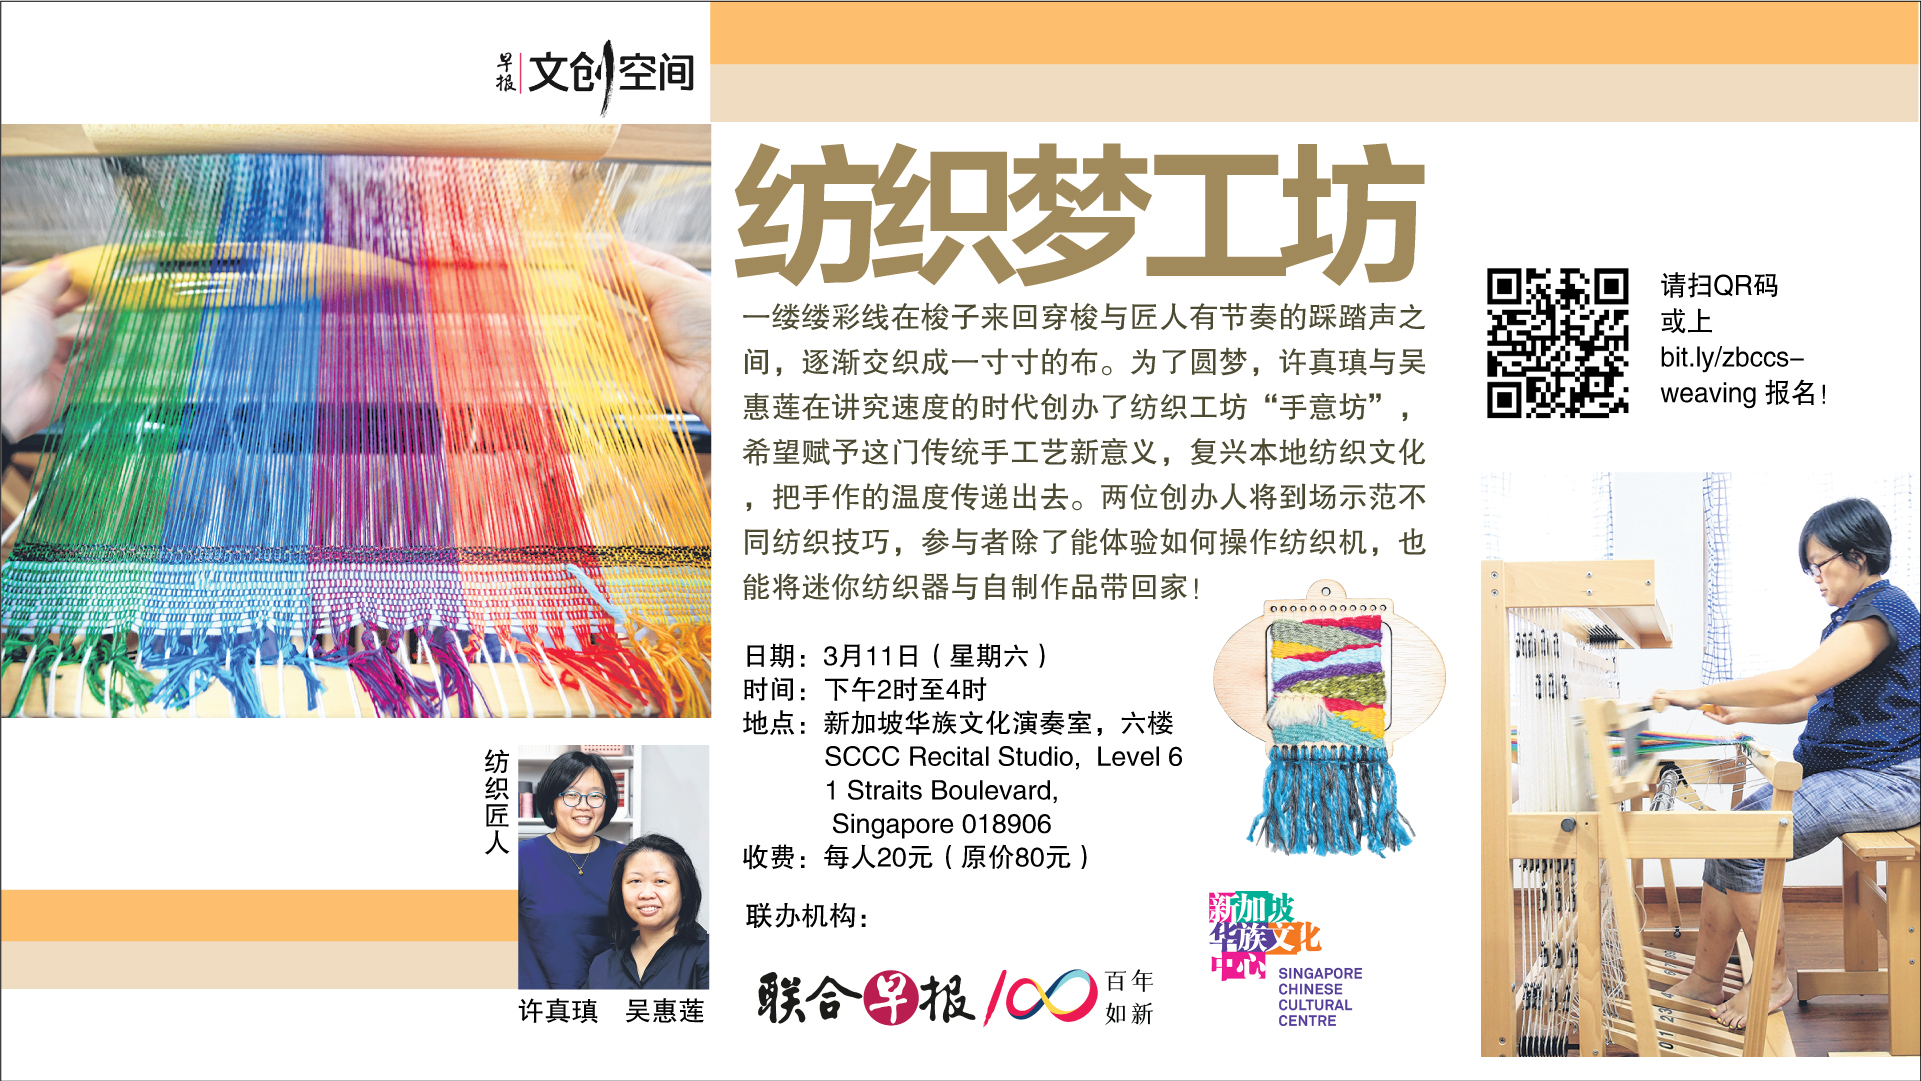 zaobao-cultural-and-creative-space-textile-workshop-ad_for-web-2